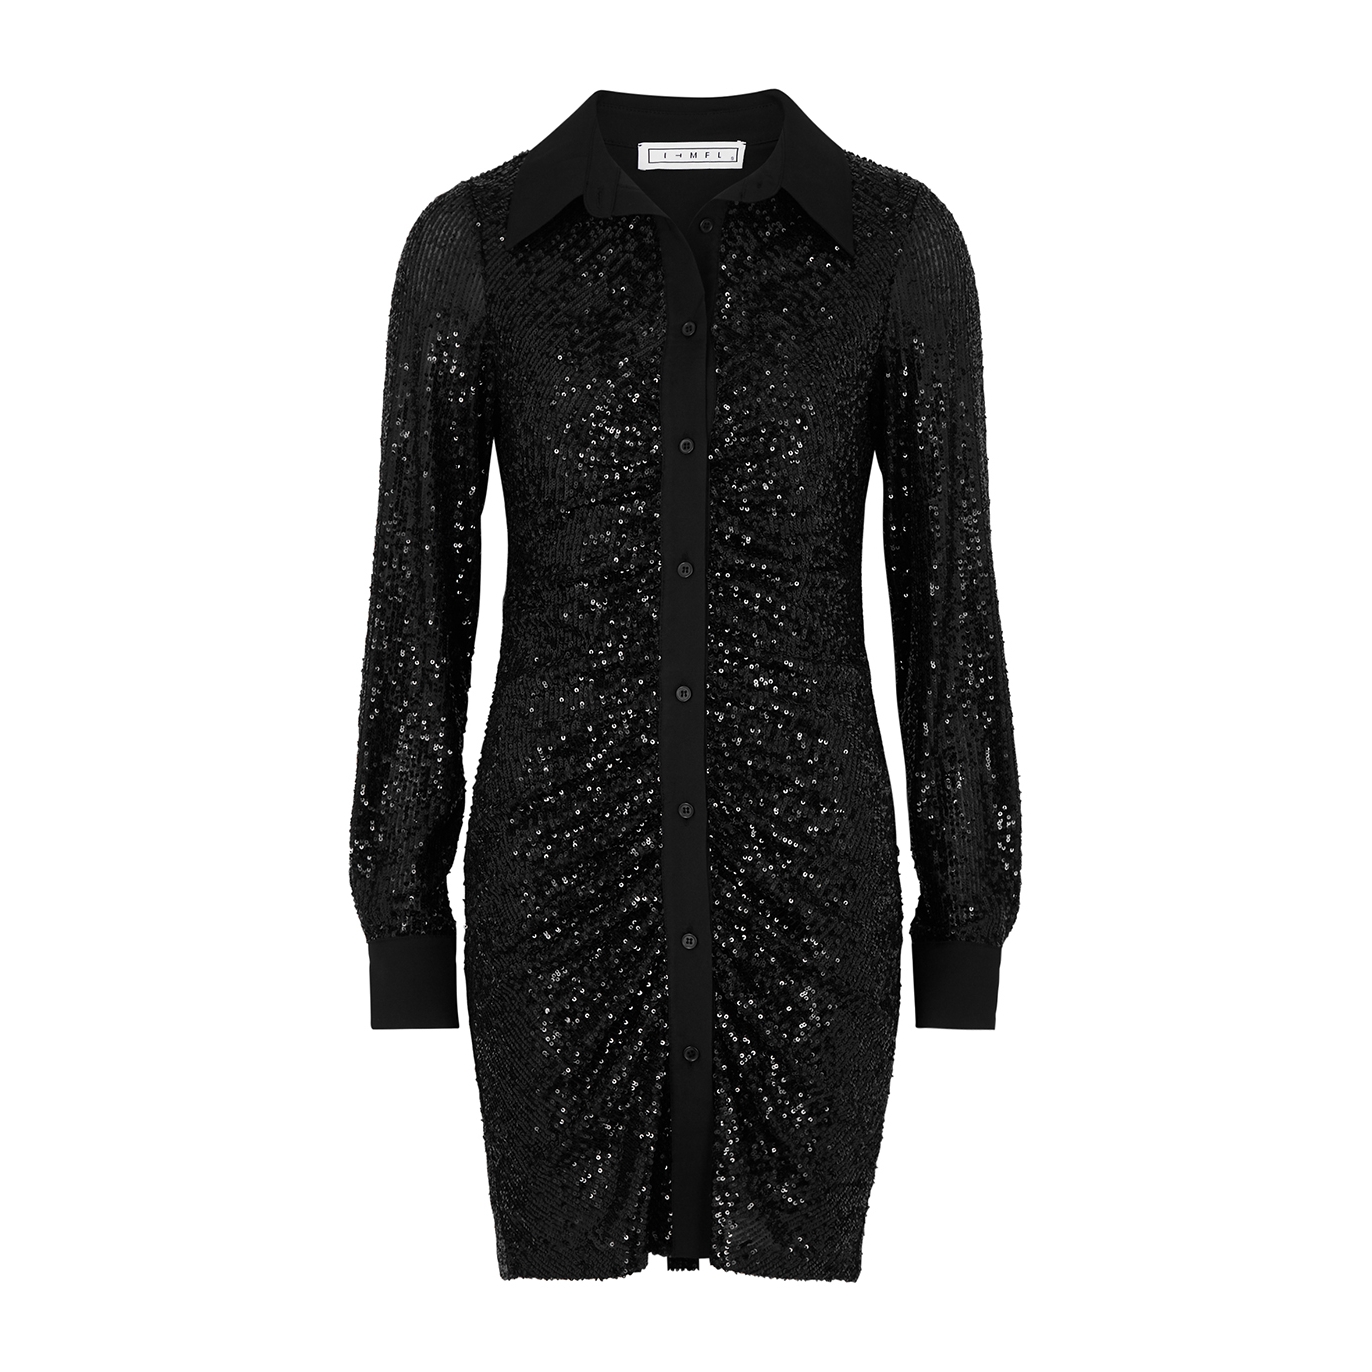 IN The Mood For Love Lina Black Sequin Shirt Dress